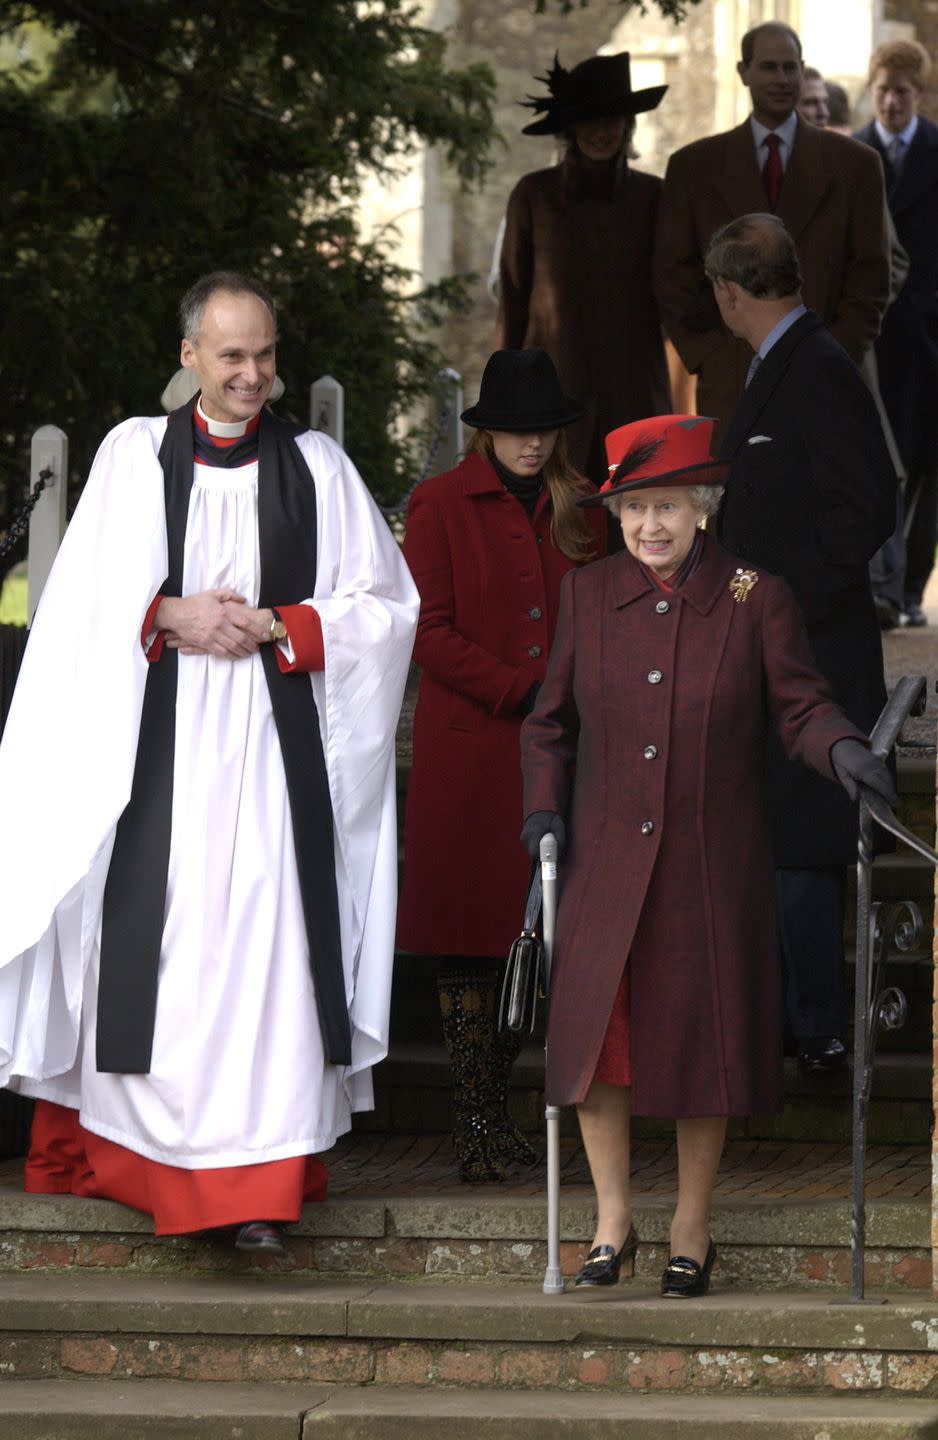 <p>In 2003, the Queen didn't let her knee surgery stop her from attending her annual family Christmas service. Pictured, she walks down the church steps with the aid of a handrail and her walking stick. </p>